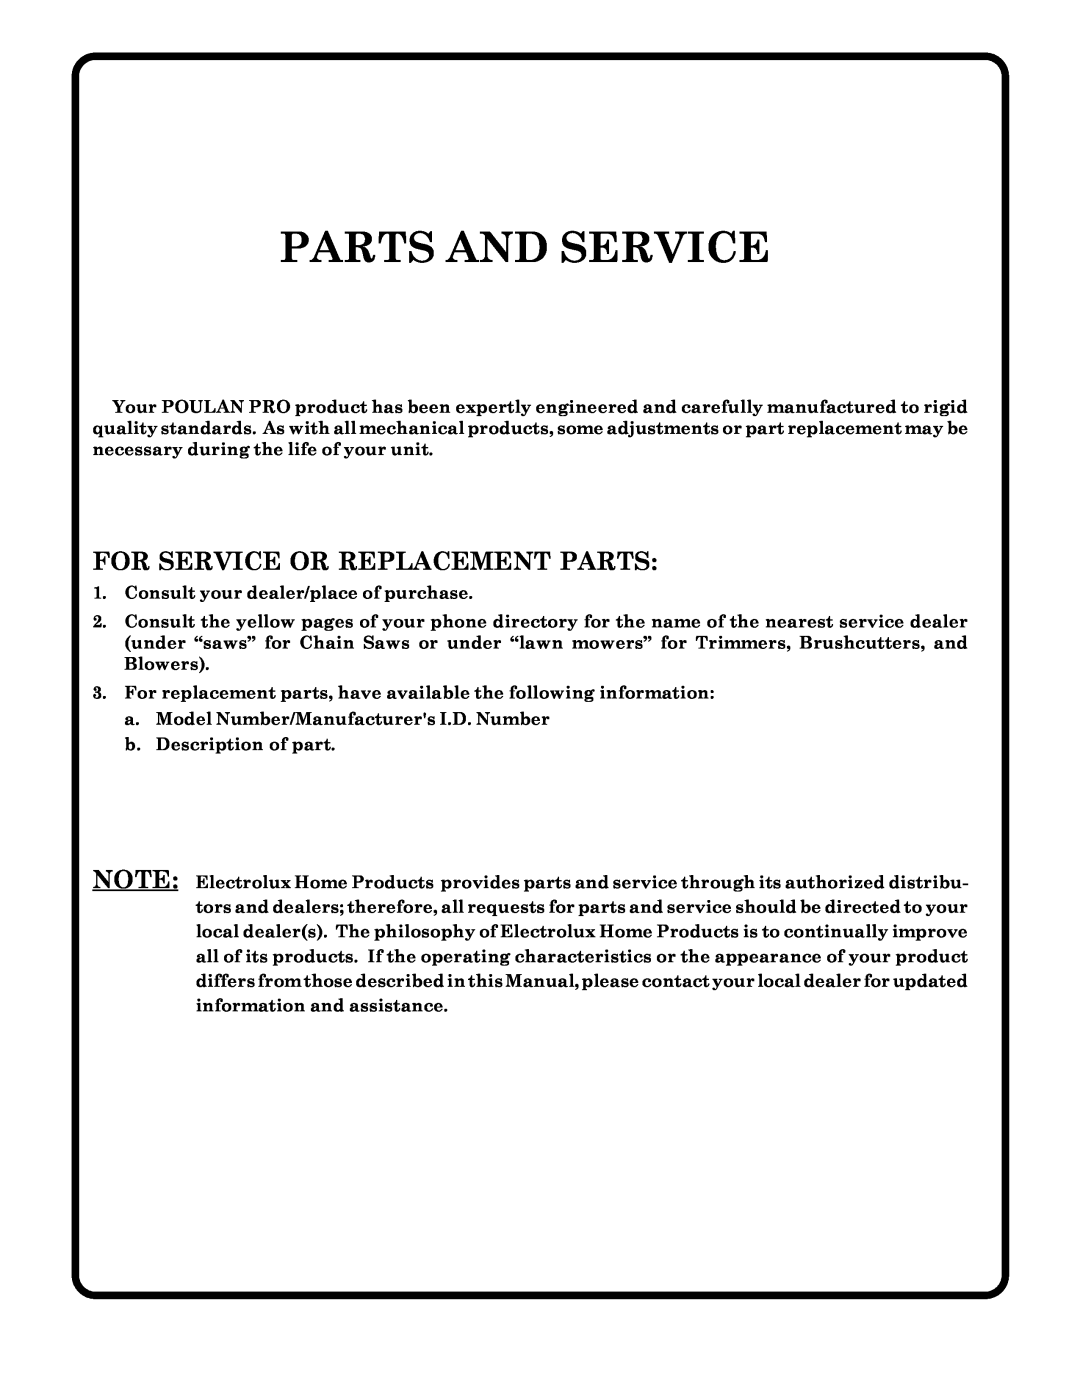 Poulan PRGT22H50C owner manual Parts And Service, For Service Or Replacement Parts 